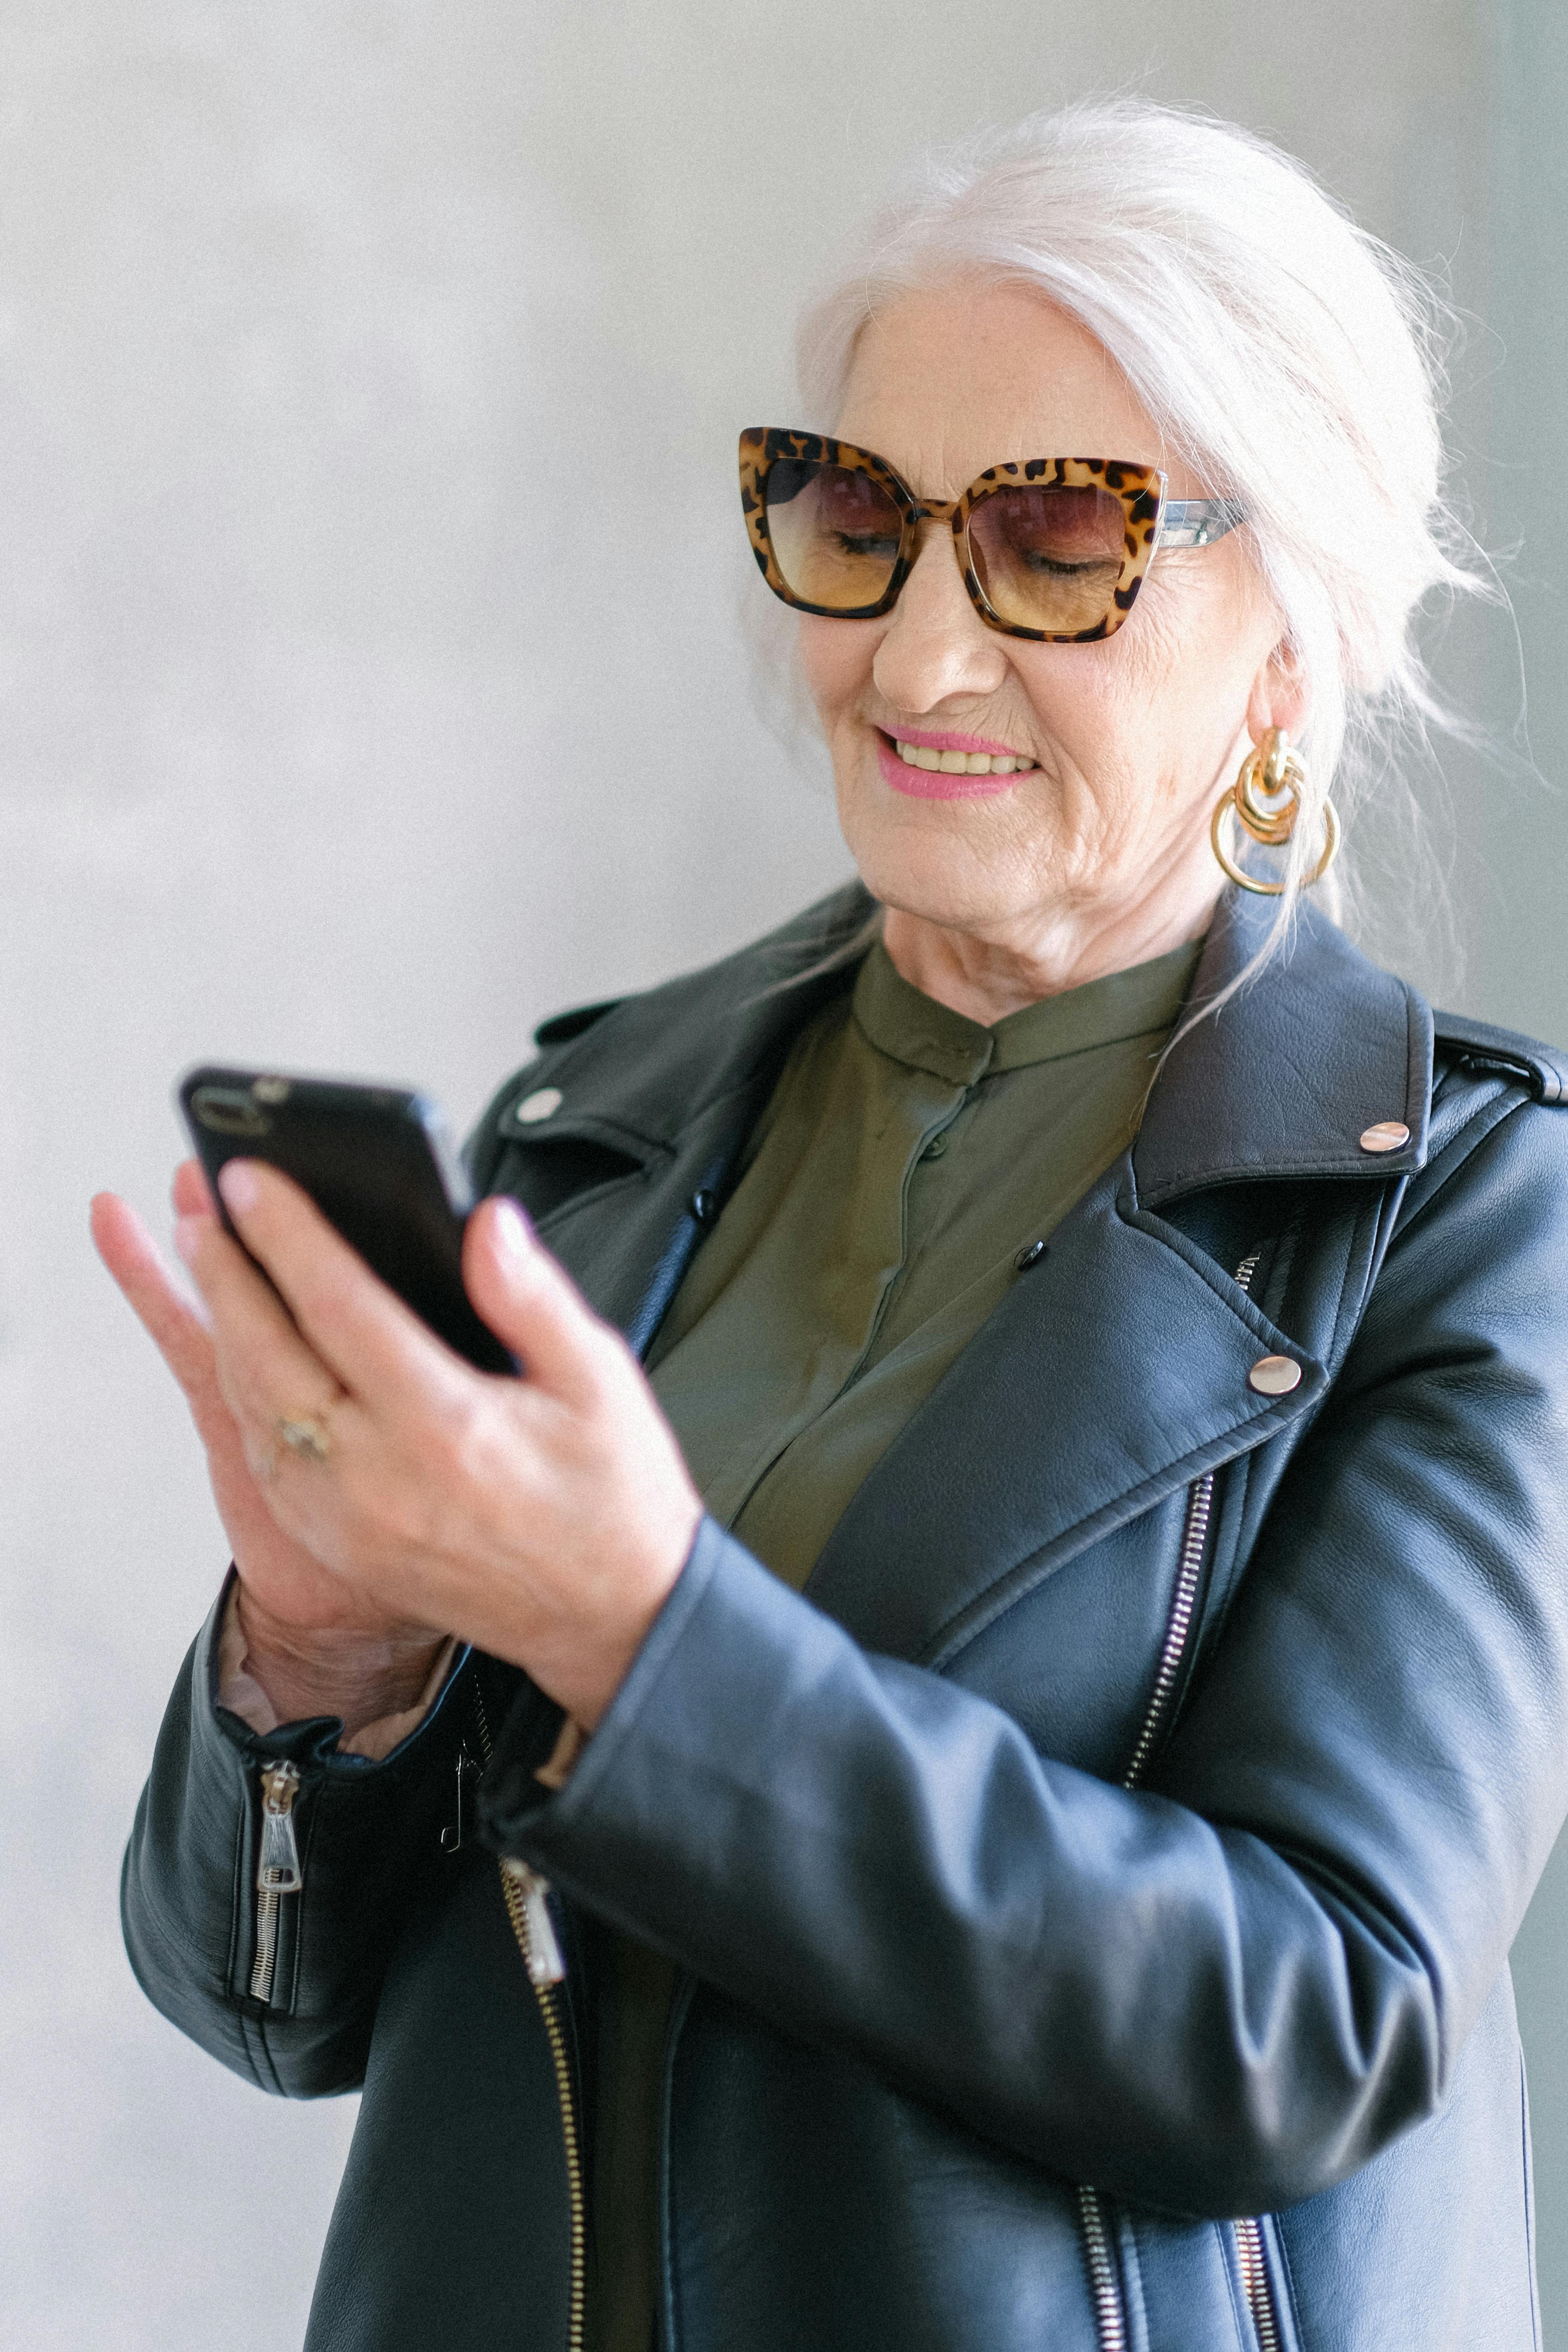 A content senior woman hanging up the phone | Source: Pexels